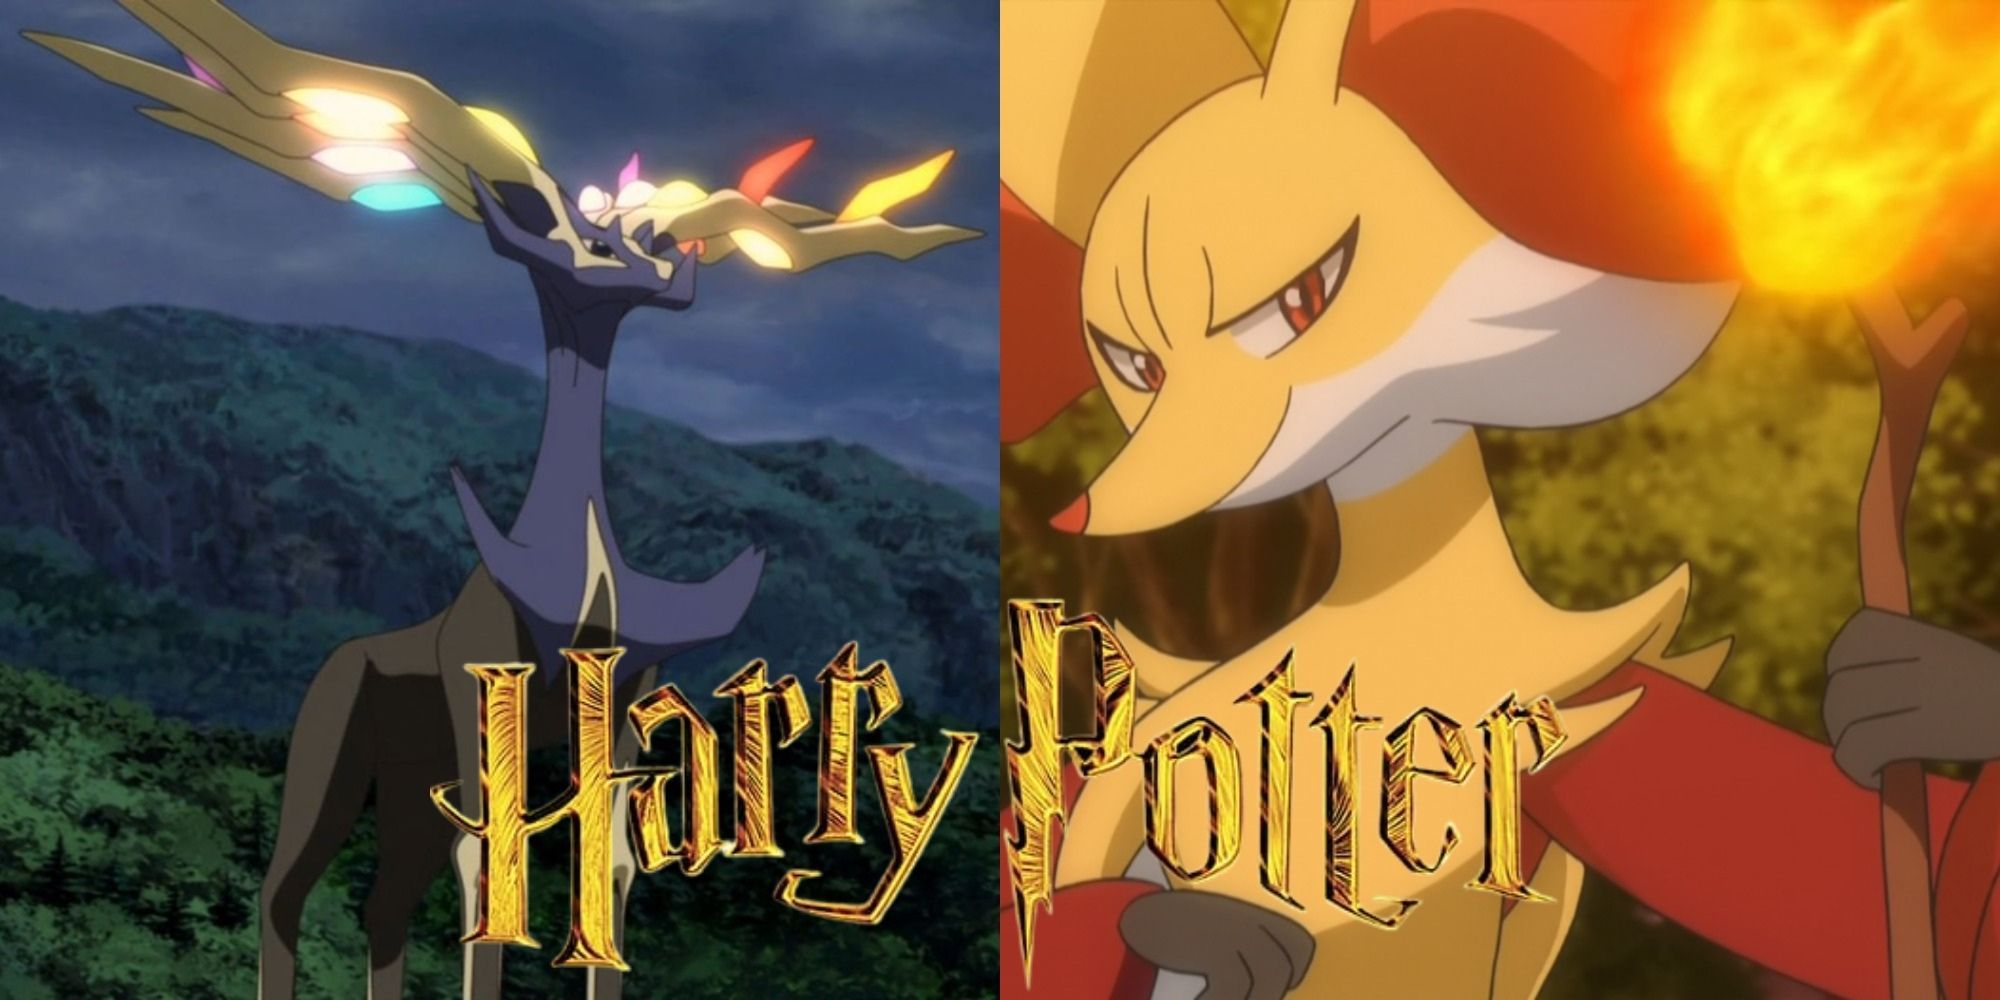 10 Pokémon That Would Fit In The Harry Potter Universe